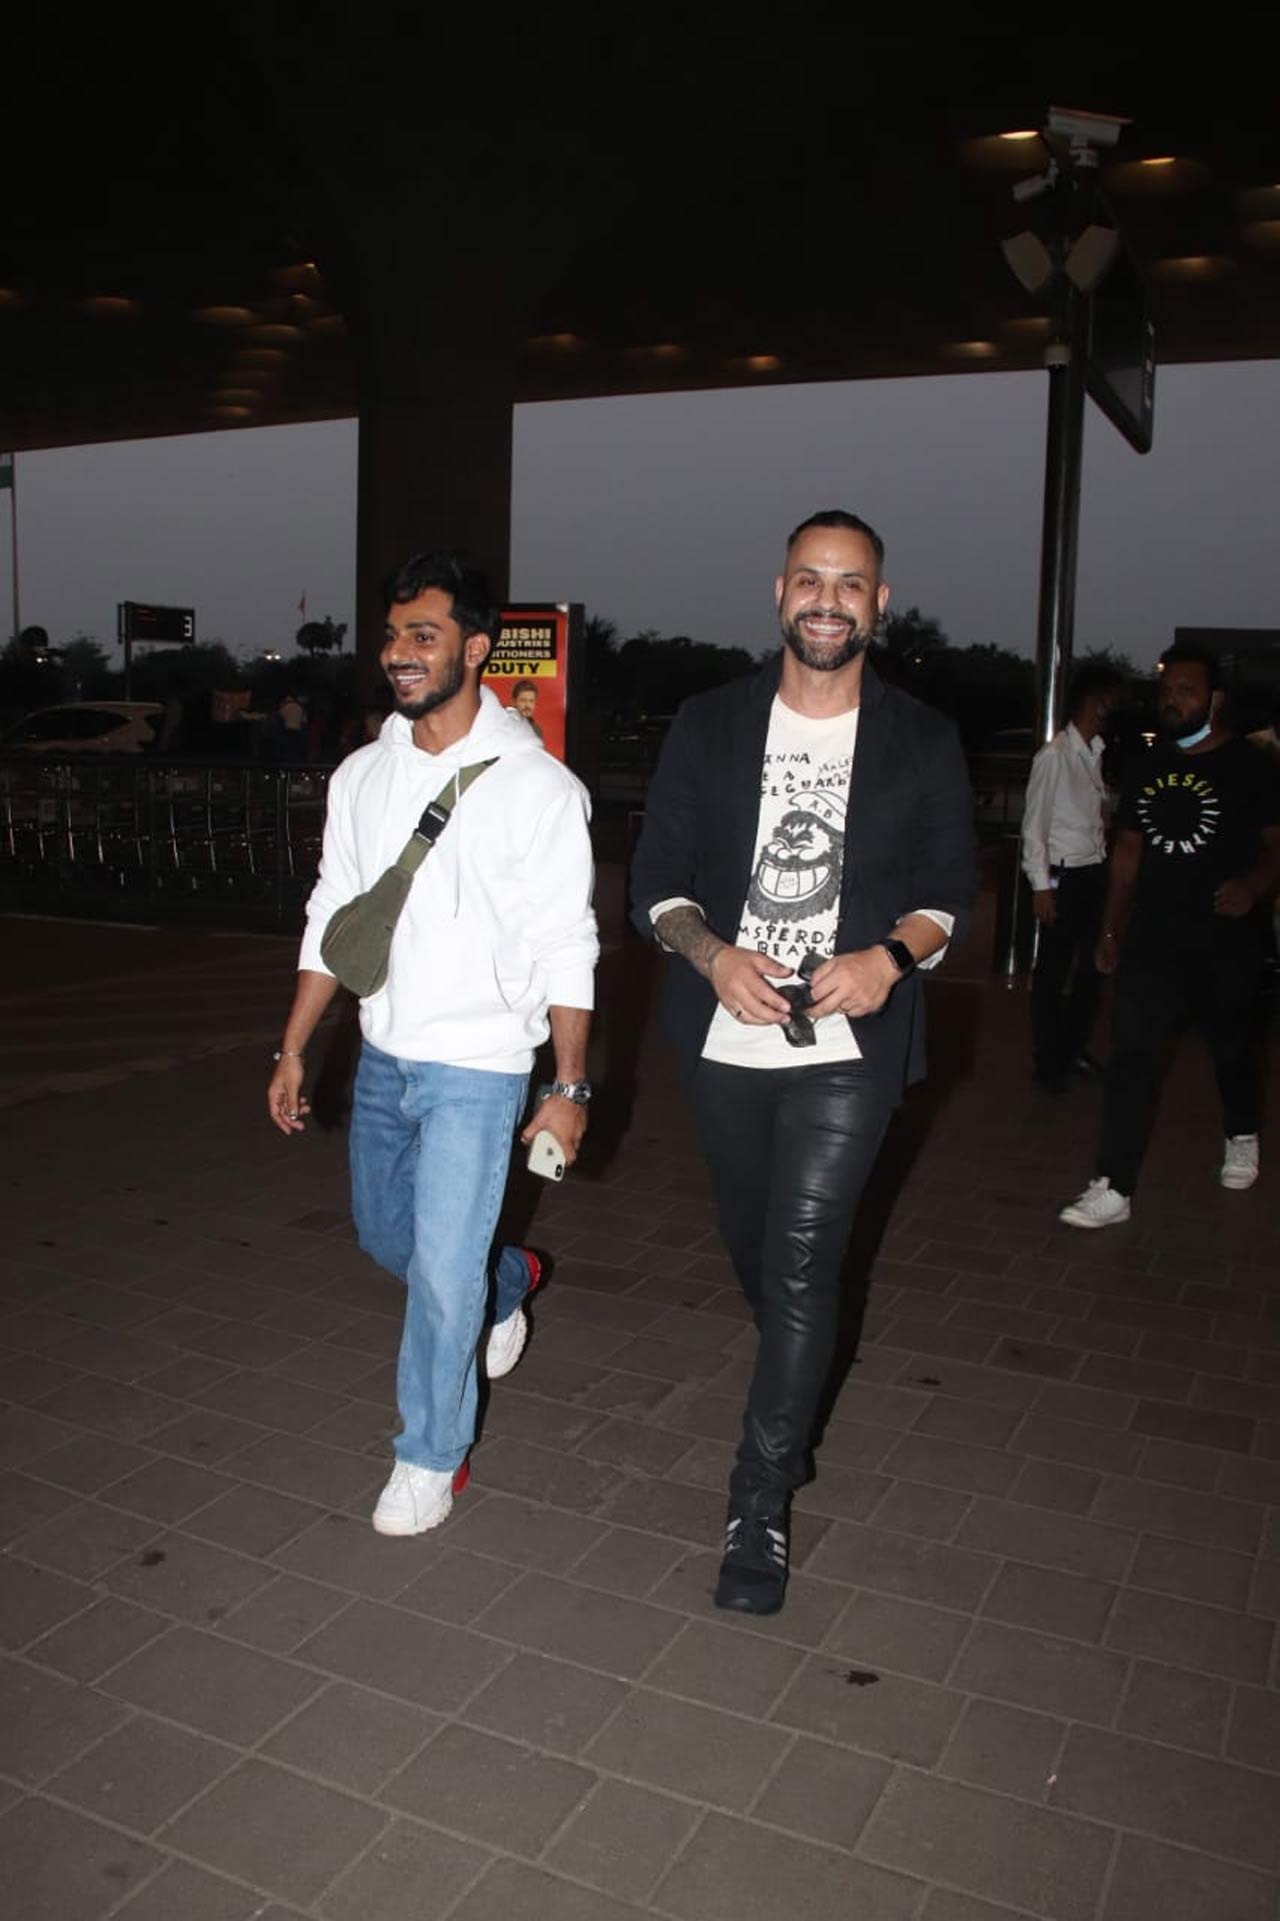 Vicky Kaushal and Katrina Kaif are all set to tie the knot in a royal Rajwadi style wedding. To bless the duo, their family and friends have already started leaving the city as the wedding is happening in Rajasthan. Katrina Kaif's hair stylist Amir Thakur and makeup artist Daniel Bauer were snapped at the Mumbai airport, as they left for Rajasthan early in the morning.